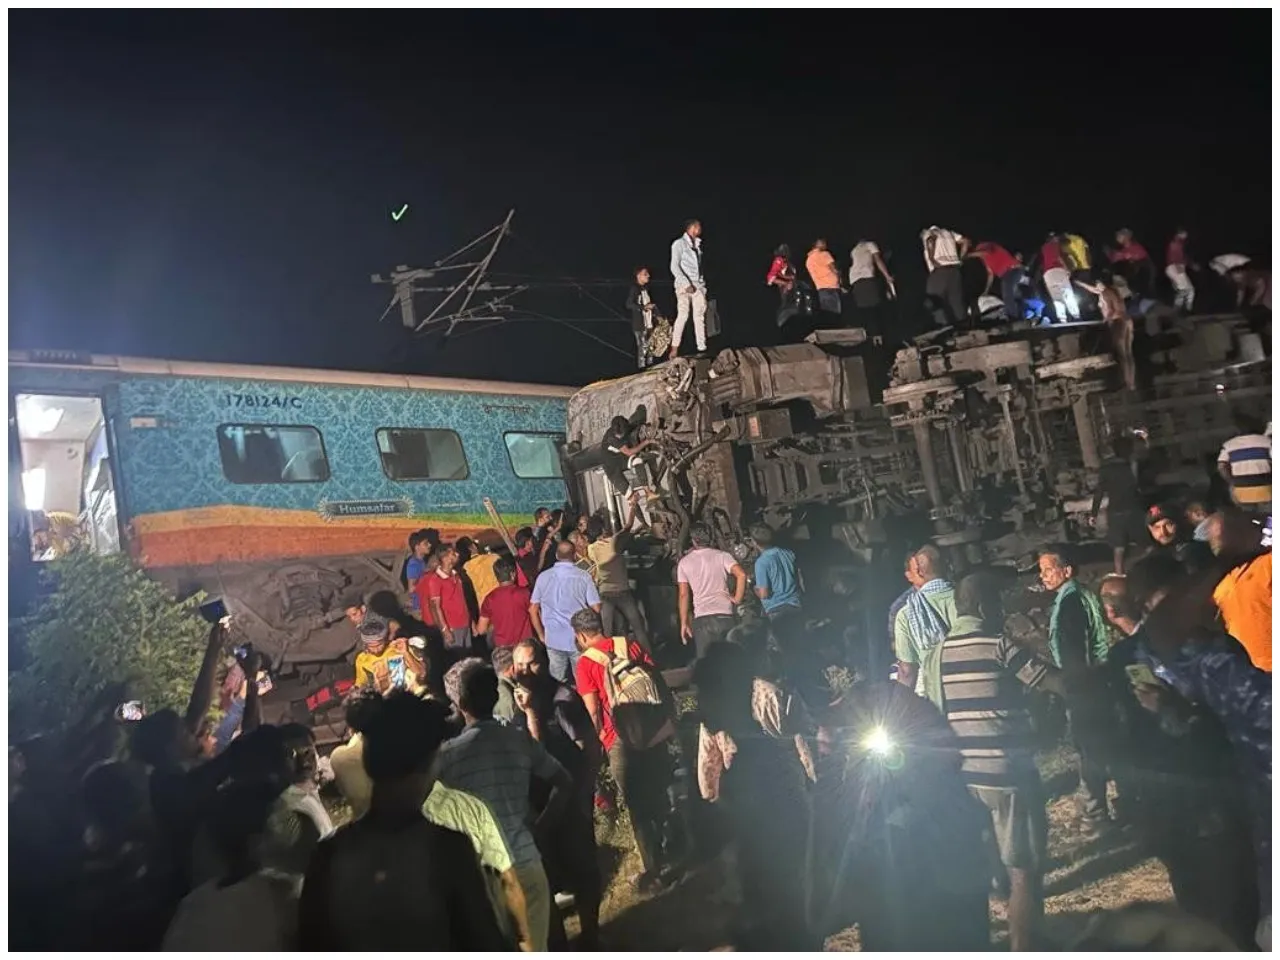 Coromandel Express accident: Why another train accident? Question raised